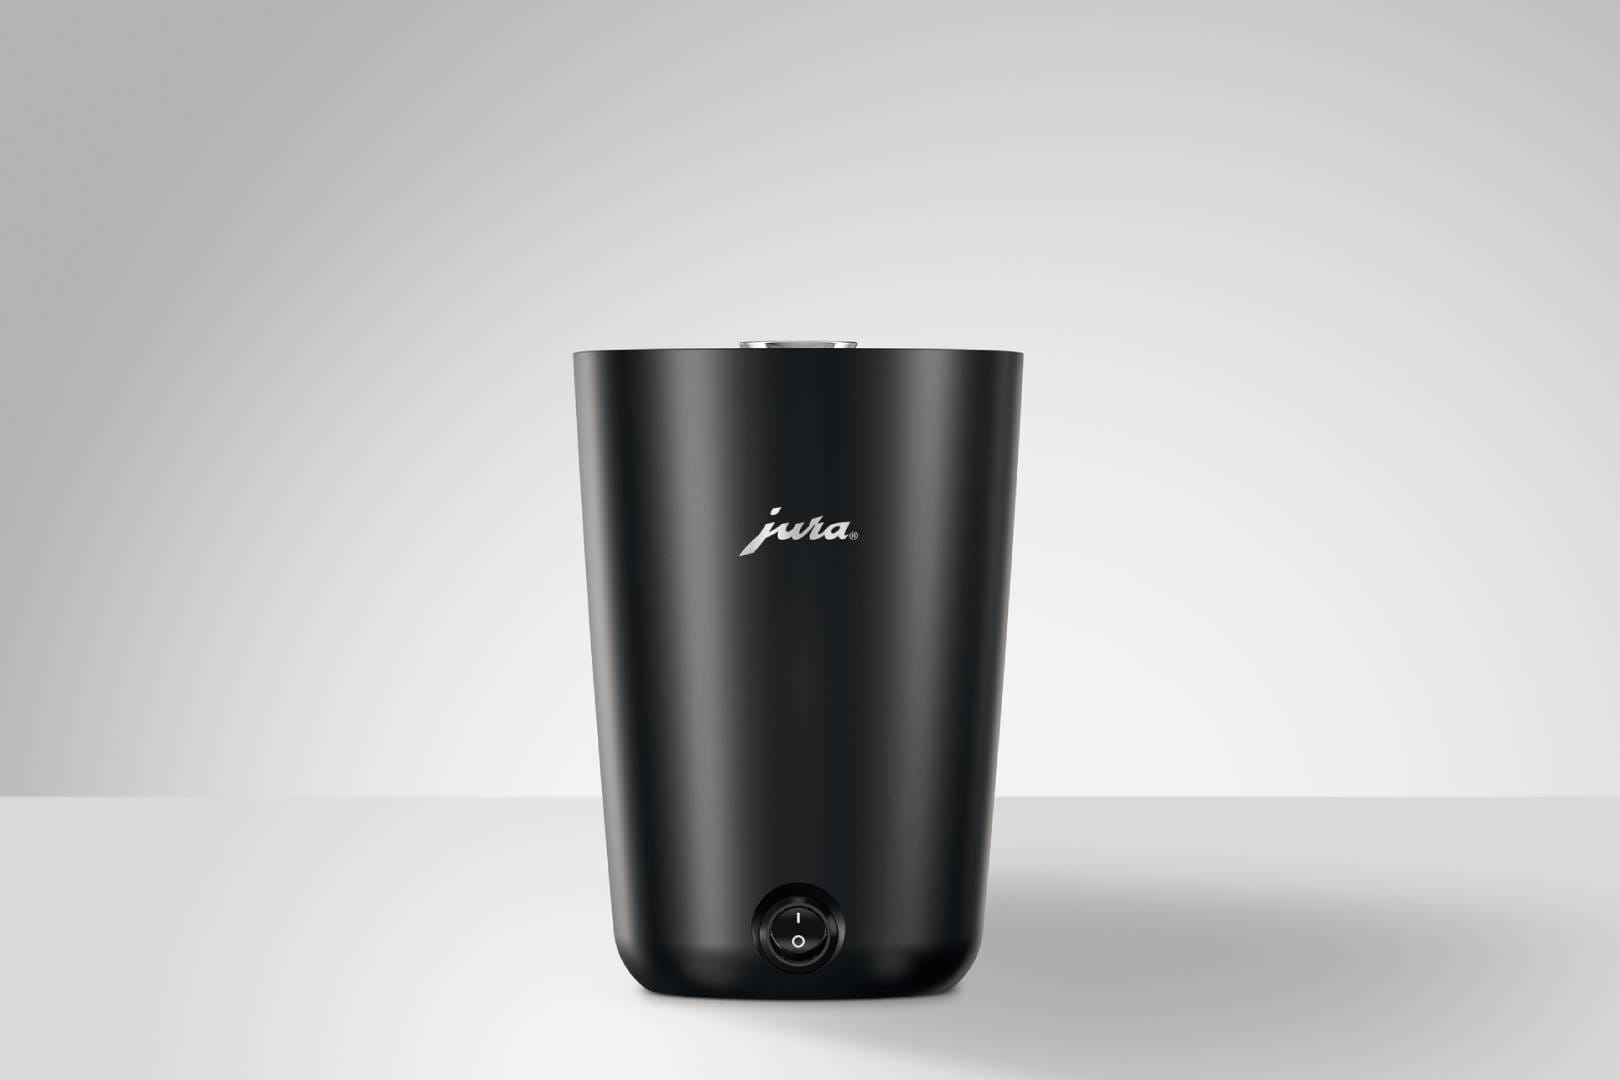 https://www.jura.com/-/media/global/images/home-products/accessories/CupWarmer-S/black/image-gallery/cupwarmer_s_image9.jpg